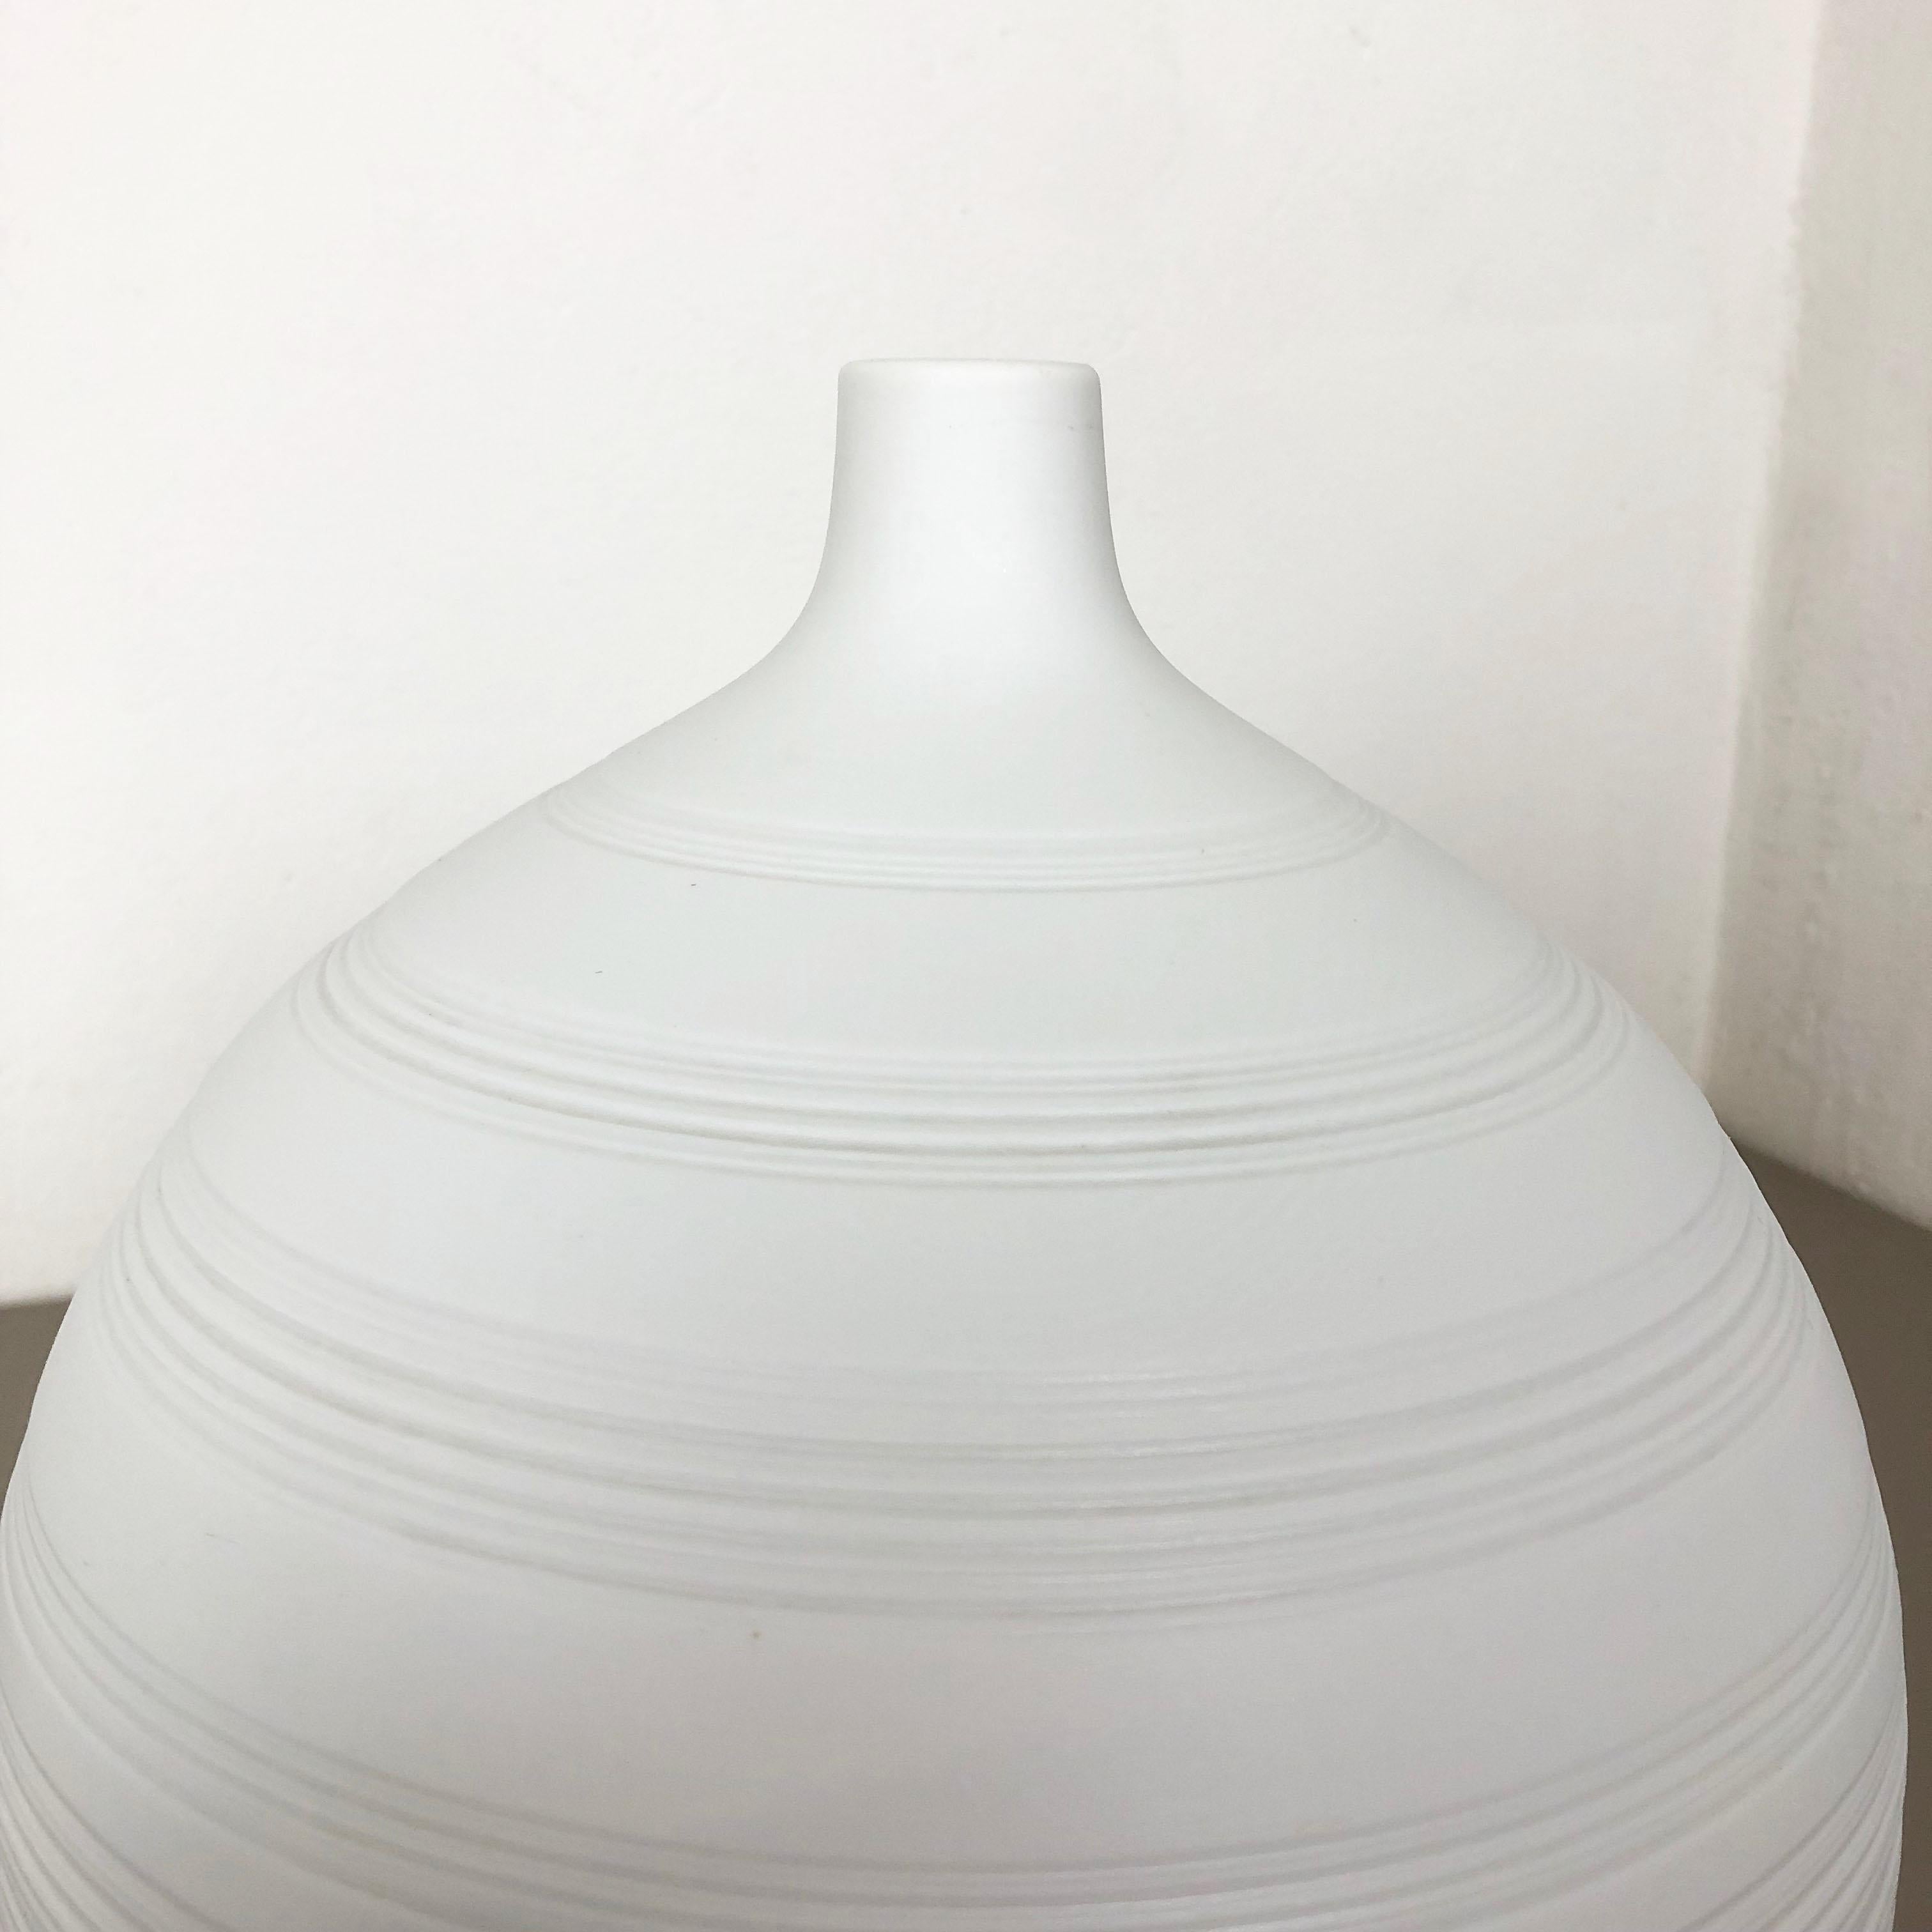 20th Century OP Art Vase Biscuit Porcelain by Hans Achtziger for Hutschenreuther, 1970s For Sale